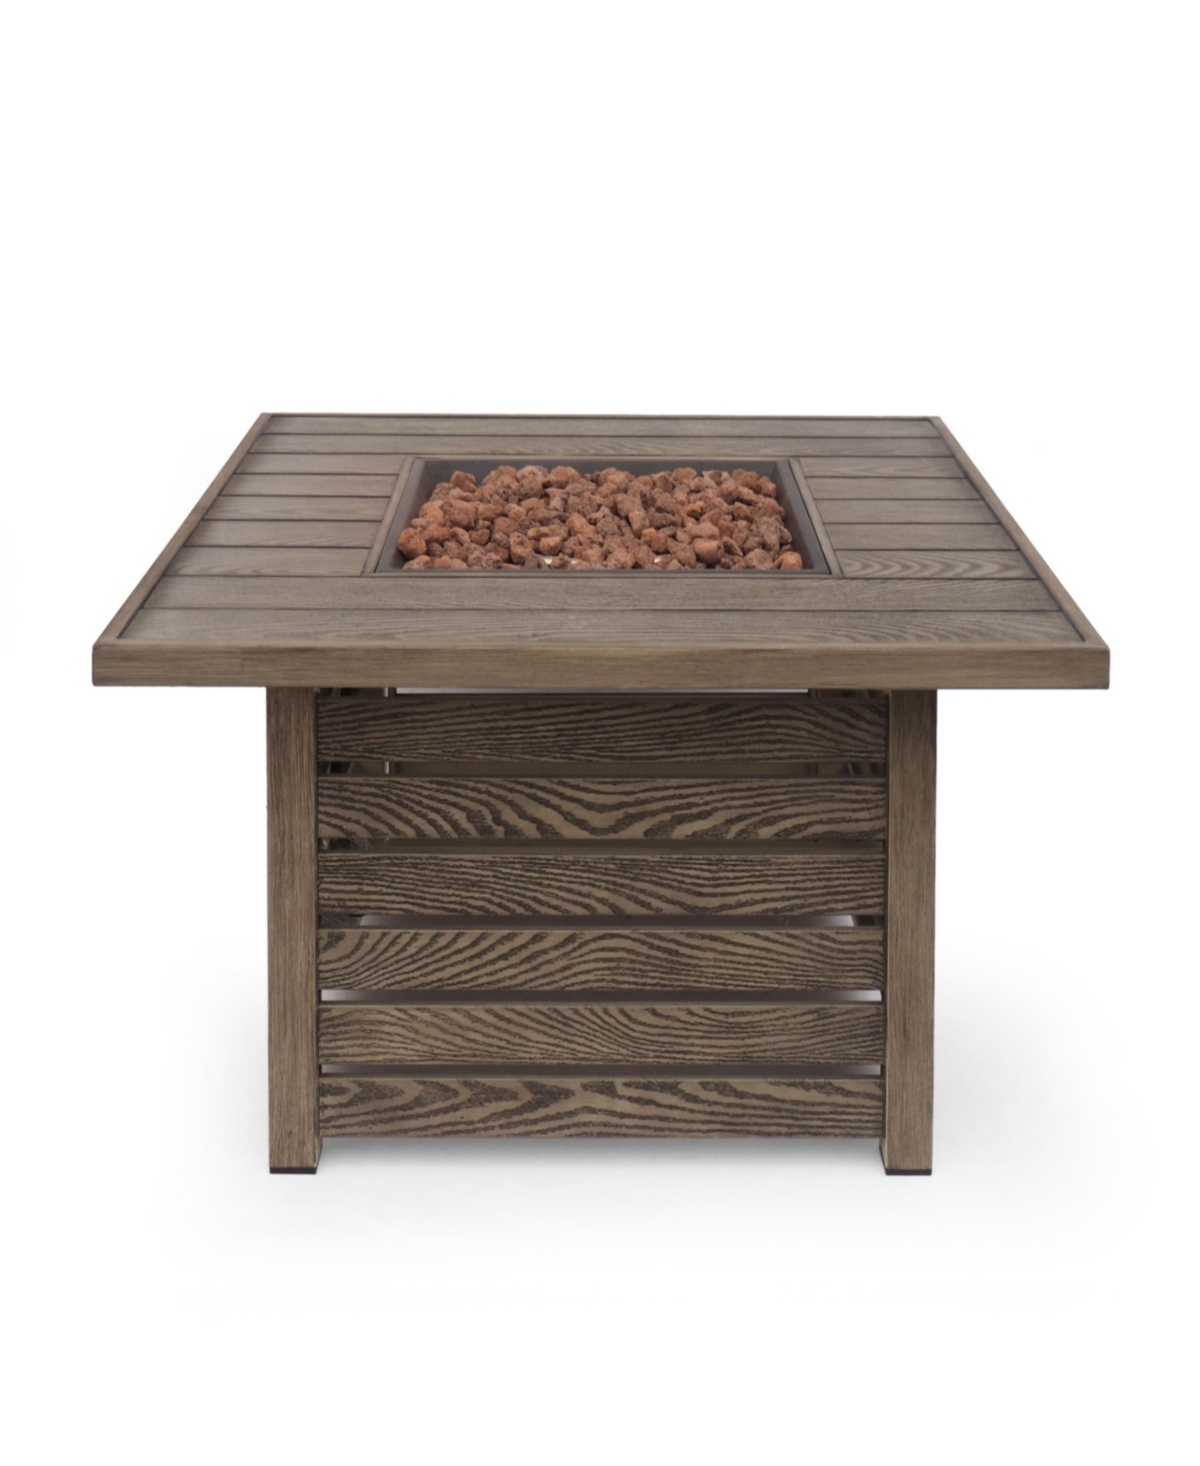 Noble House Elberton Outdoor Square Fire Pit In Brown